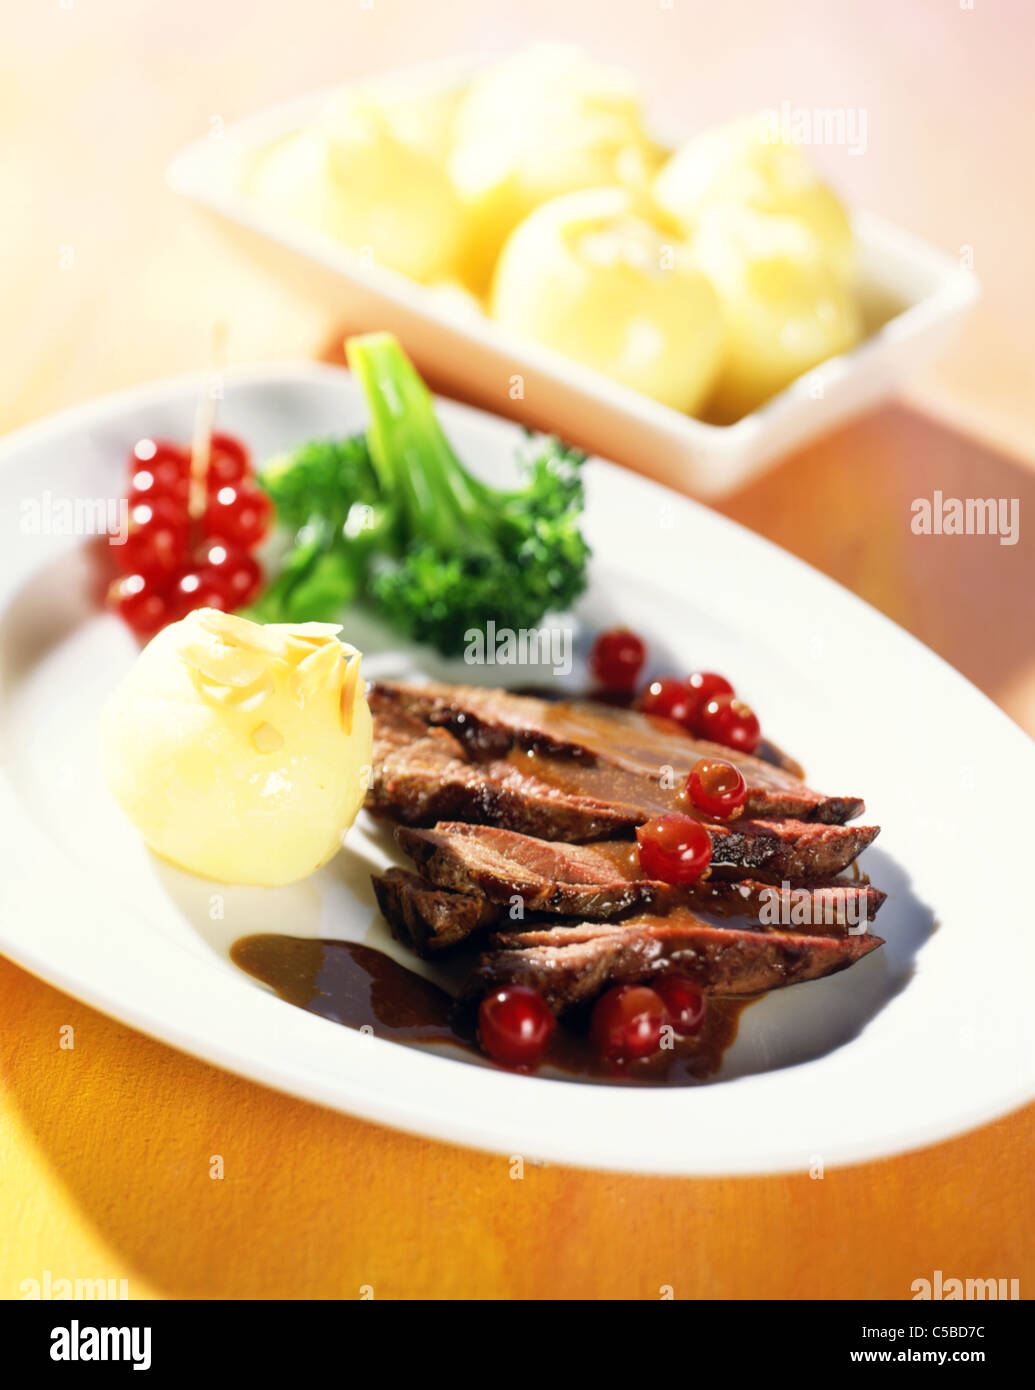 Deer shoulder with currant sauce Stock Photo